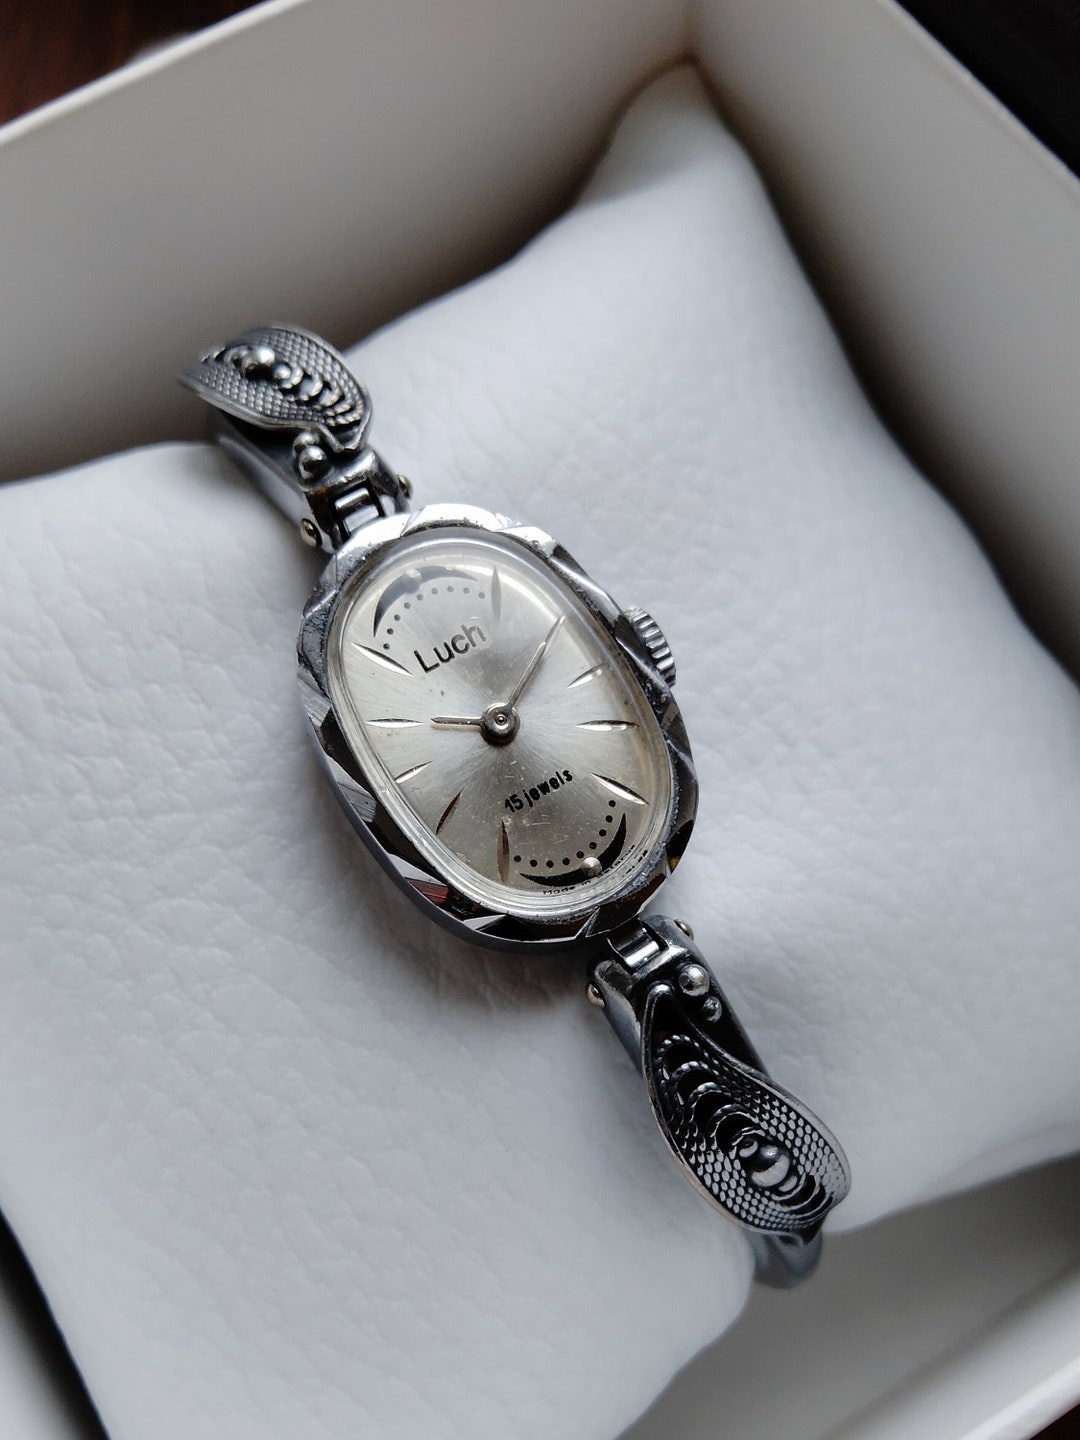 Vintage Women's Watches Small Watches Women's - Etsy